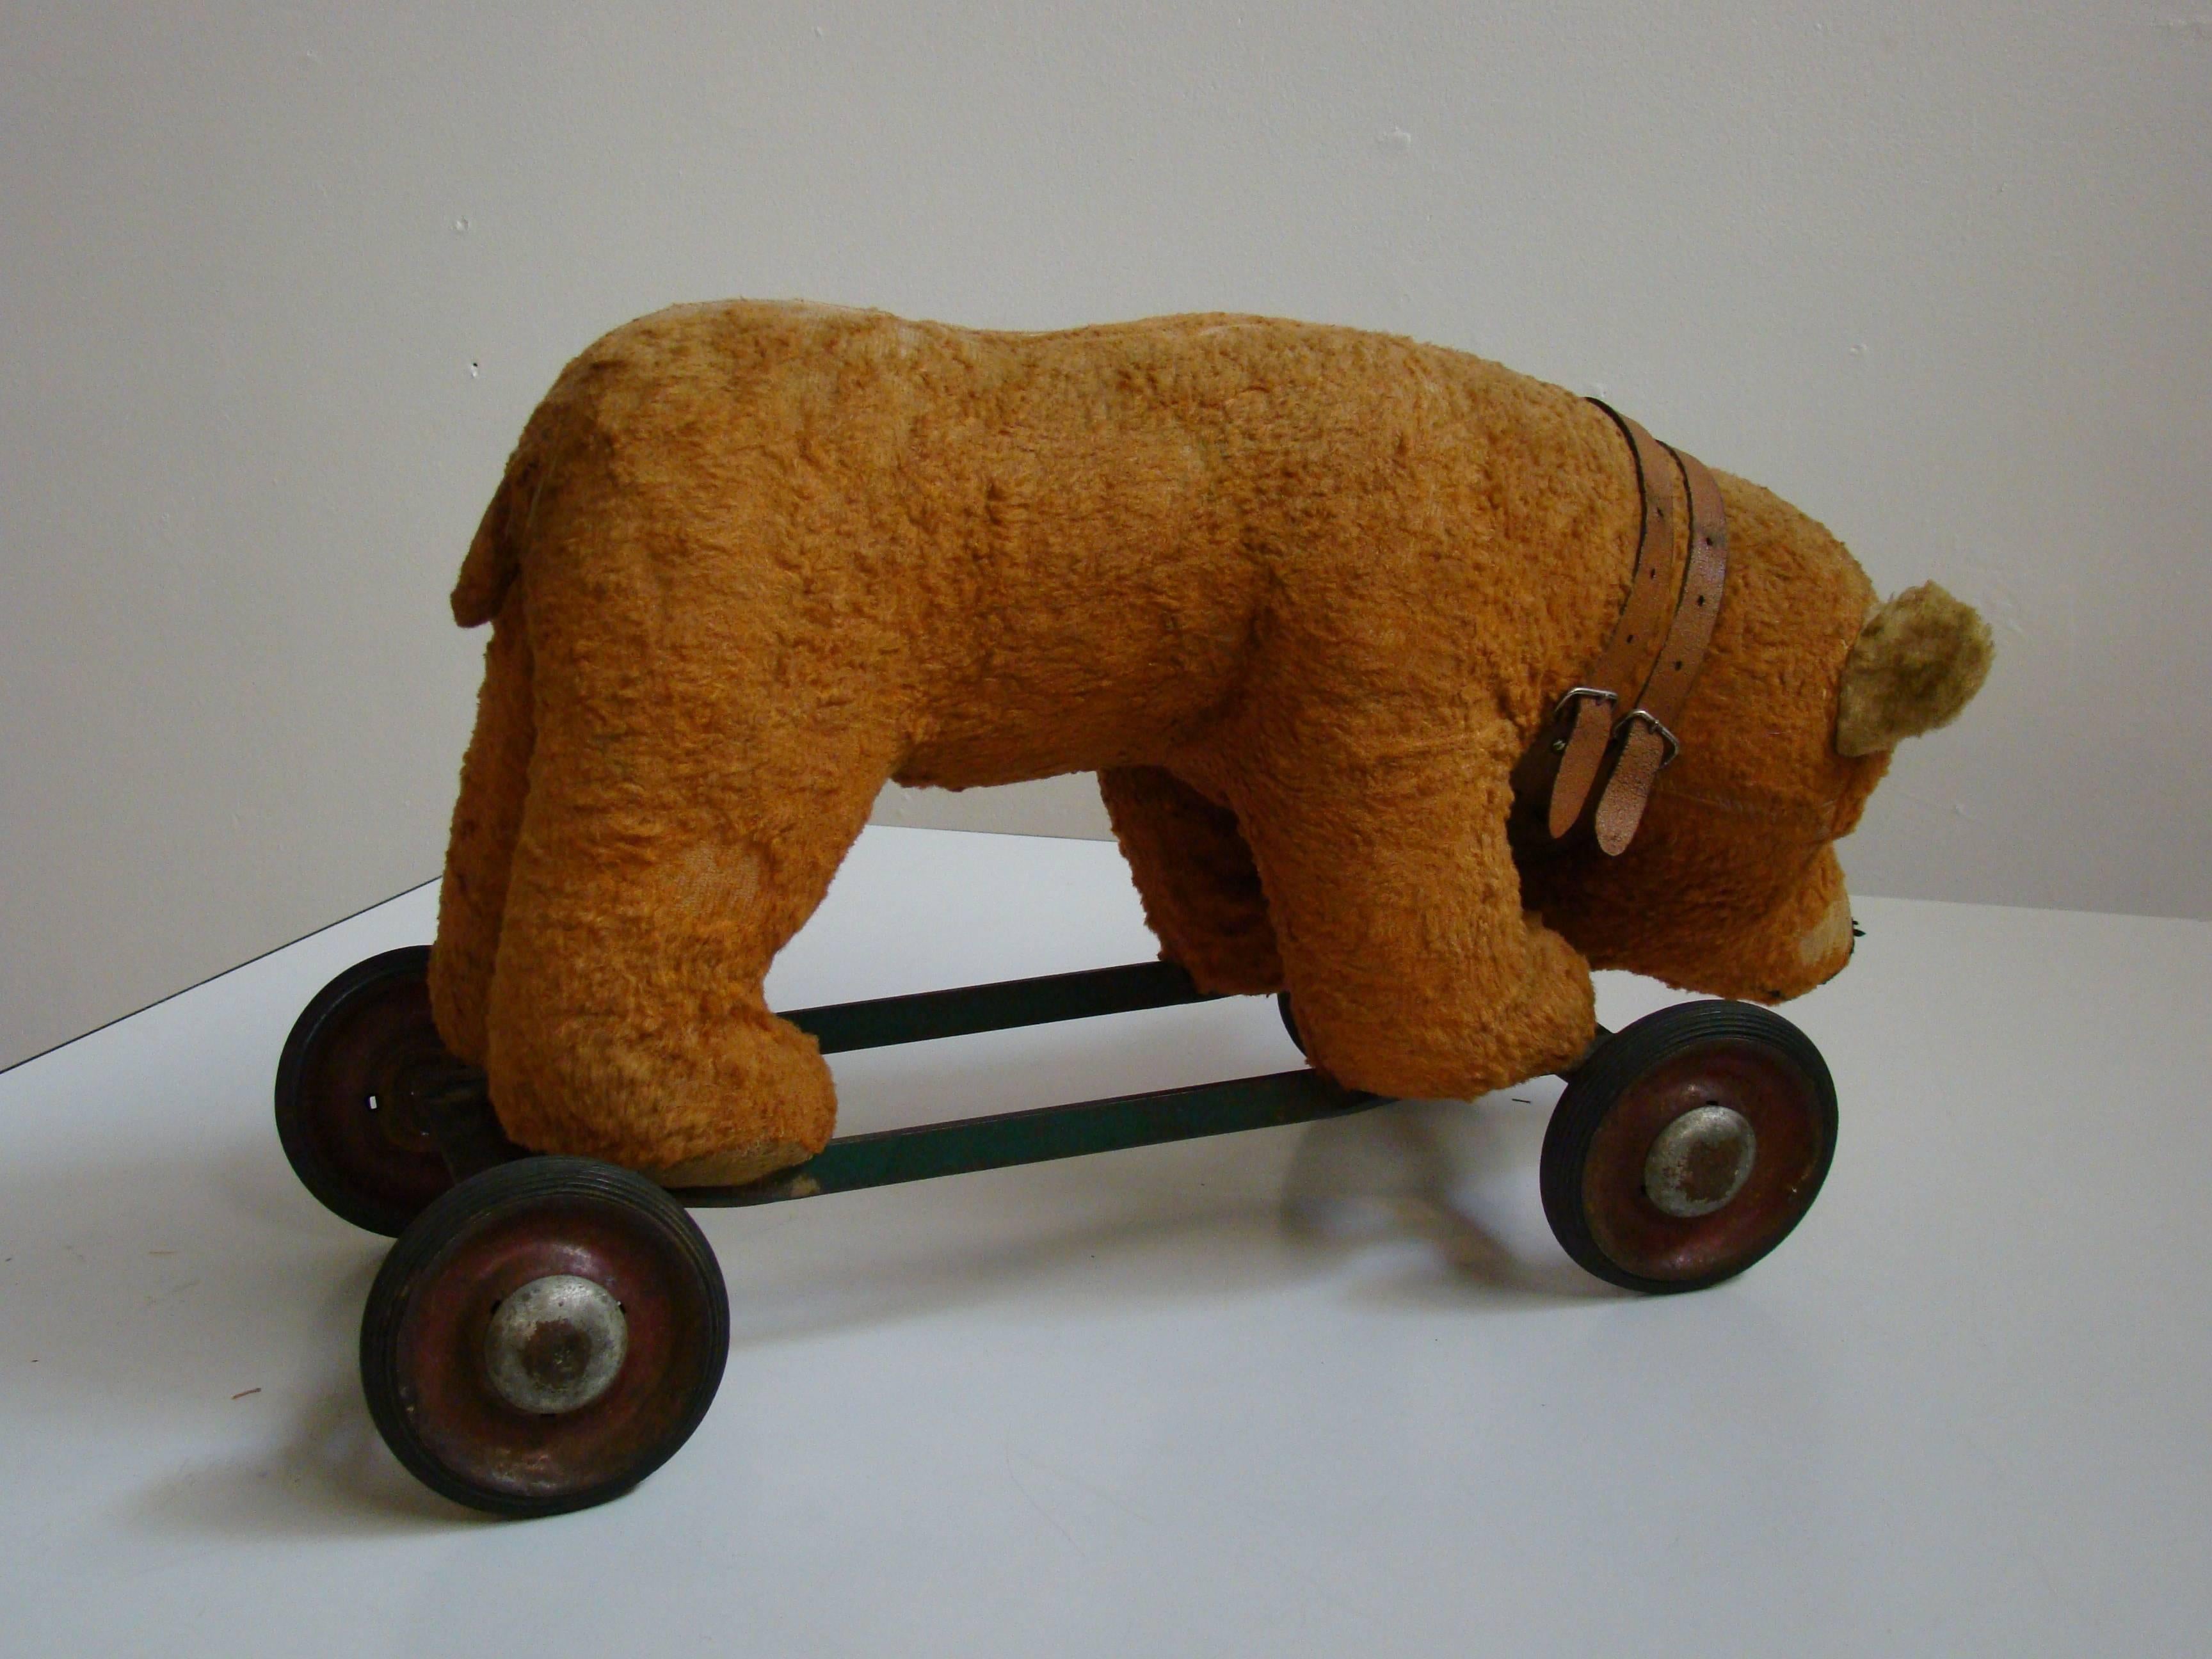 Early 20th century stuffed bear on wheels. Designed originally as a child's riding toy, this bear probably is more functional as a display piece. A wonderful example of early Americana. Although missing a few pieces of fur here and there, all and